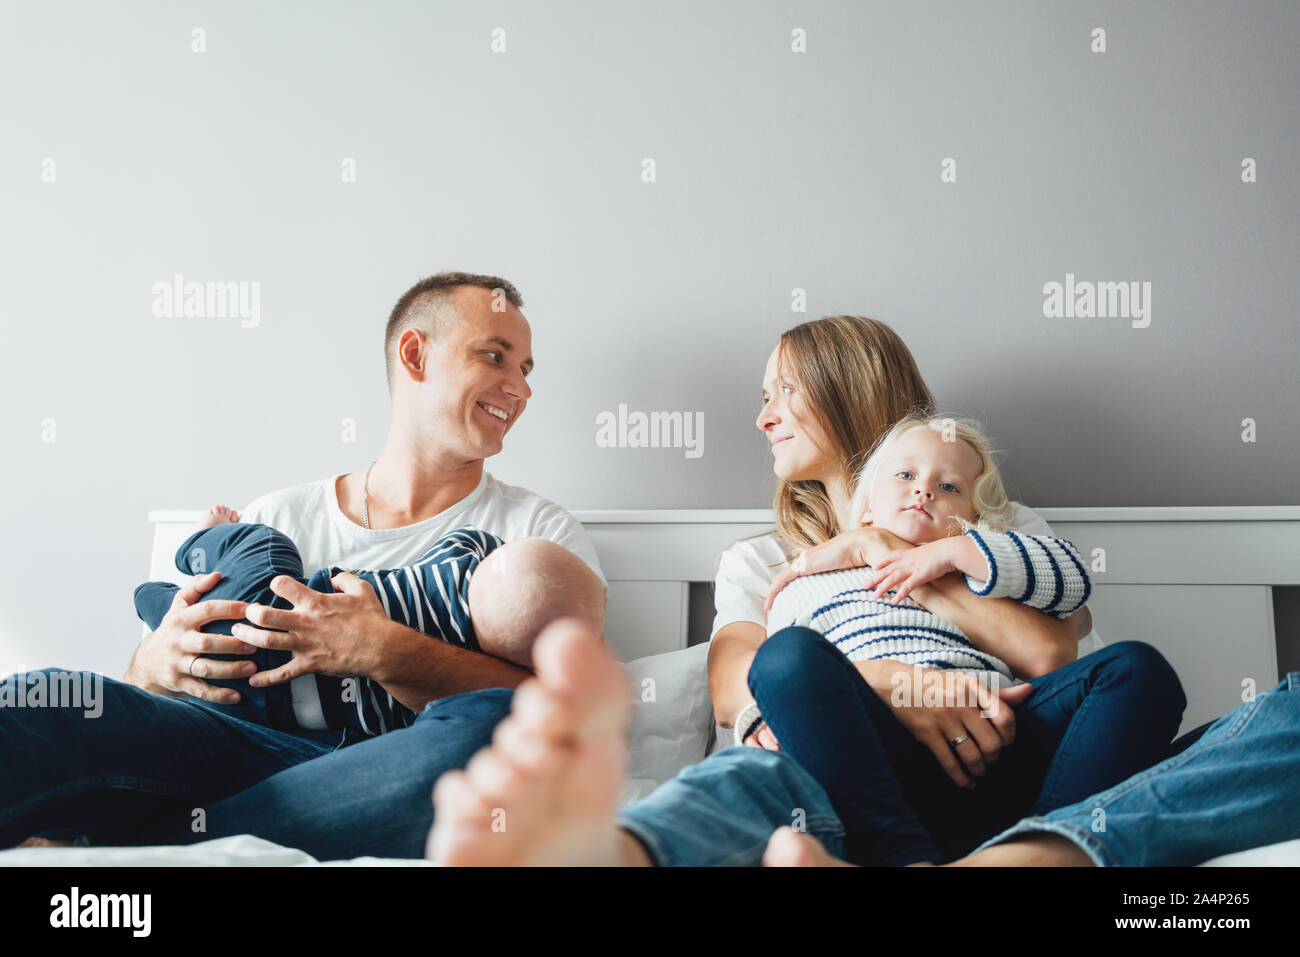 Happy family with two child have fun at home. Parents sit with their children on the bed and play with them Stock Photo